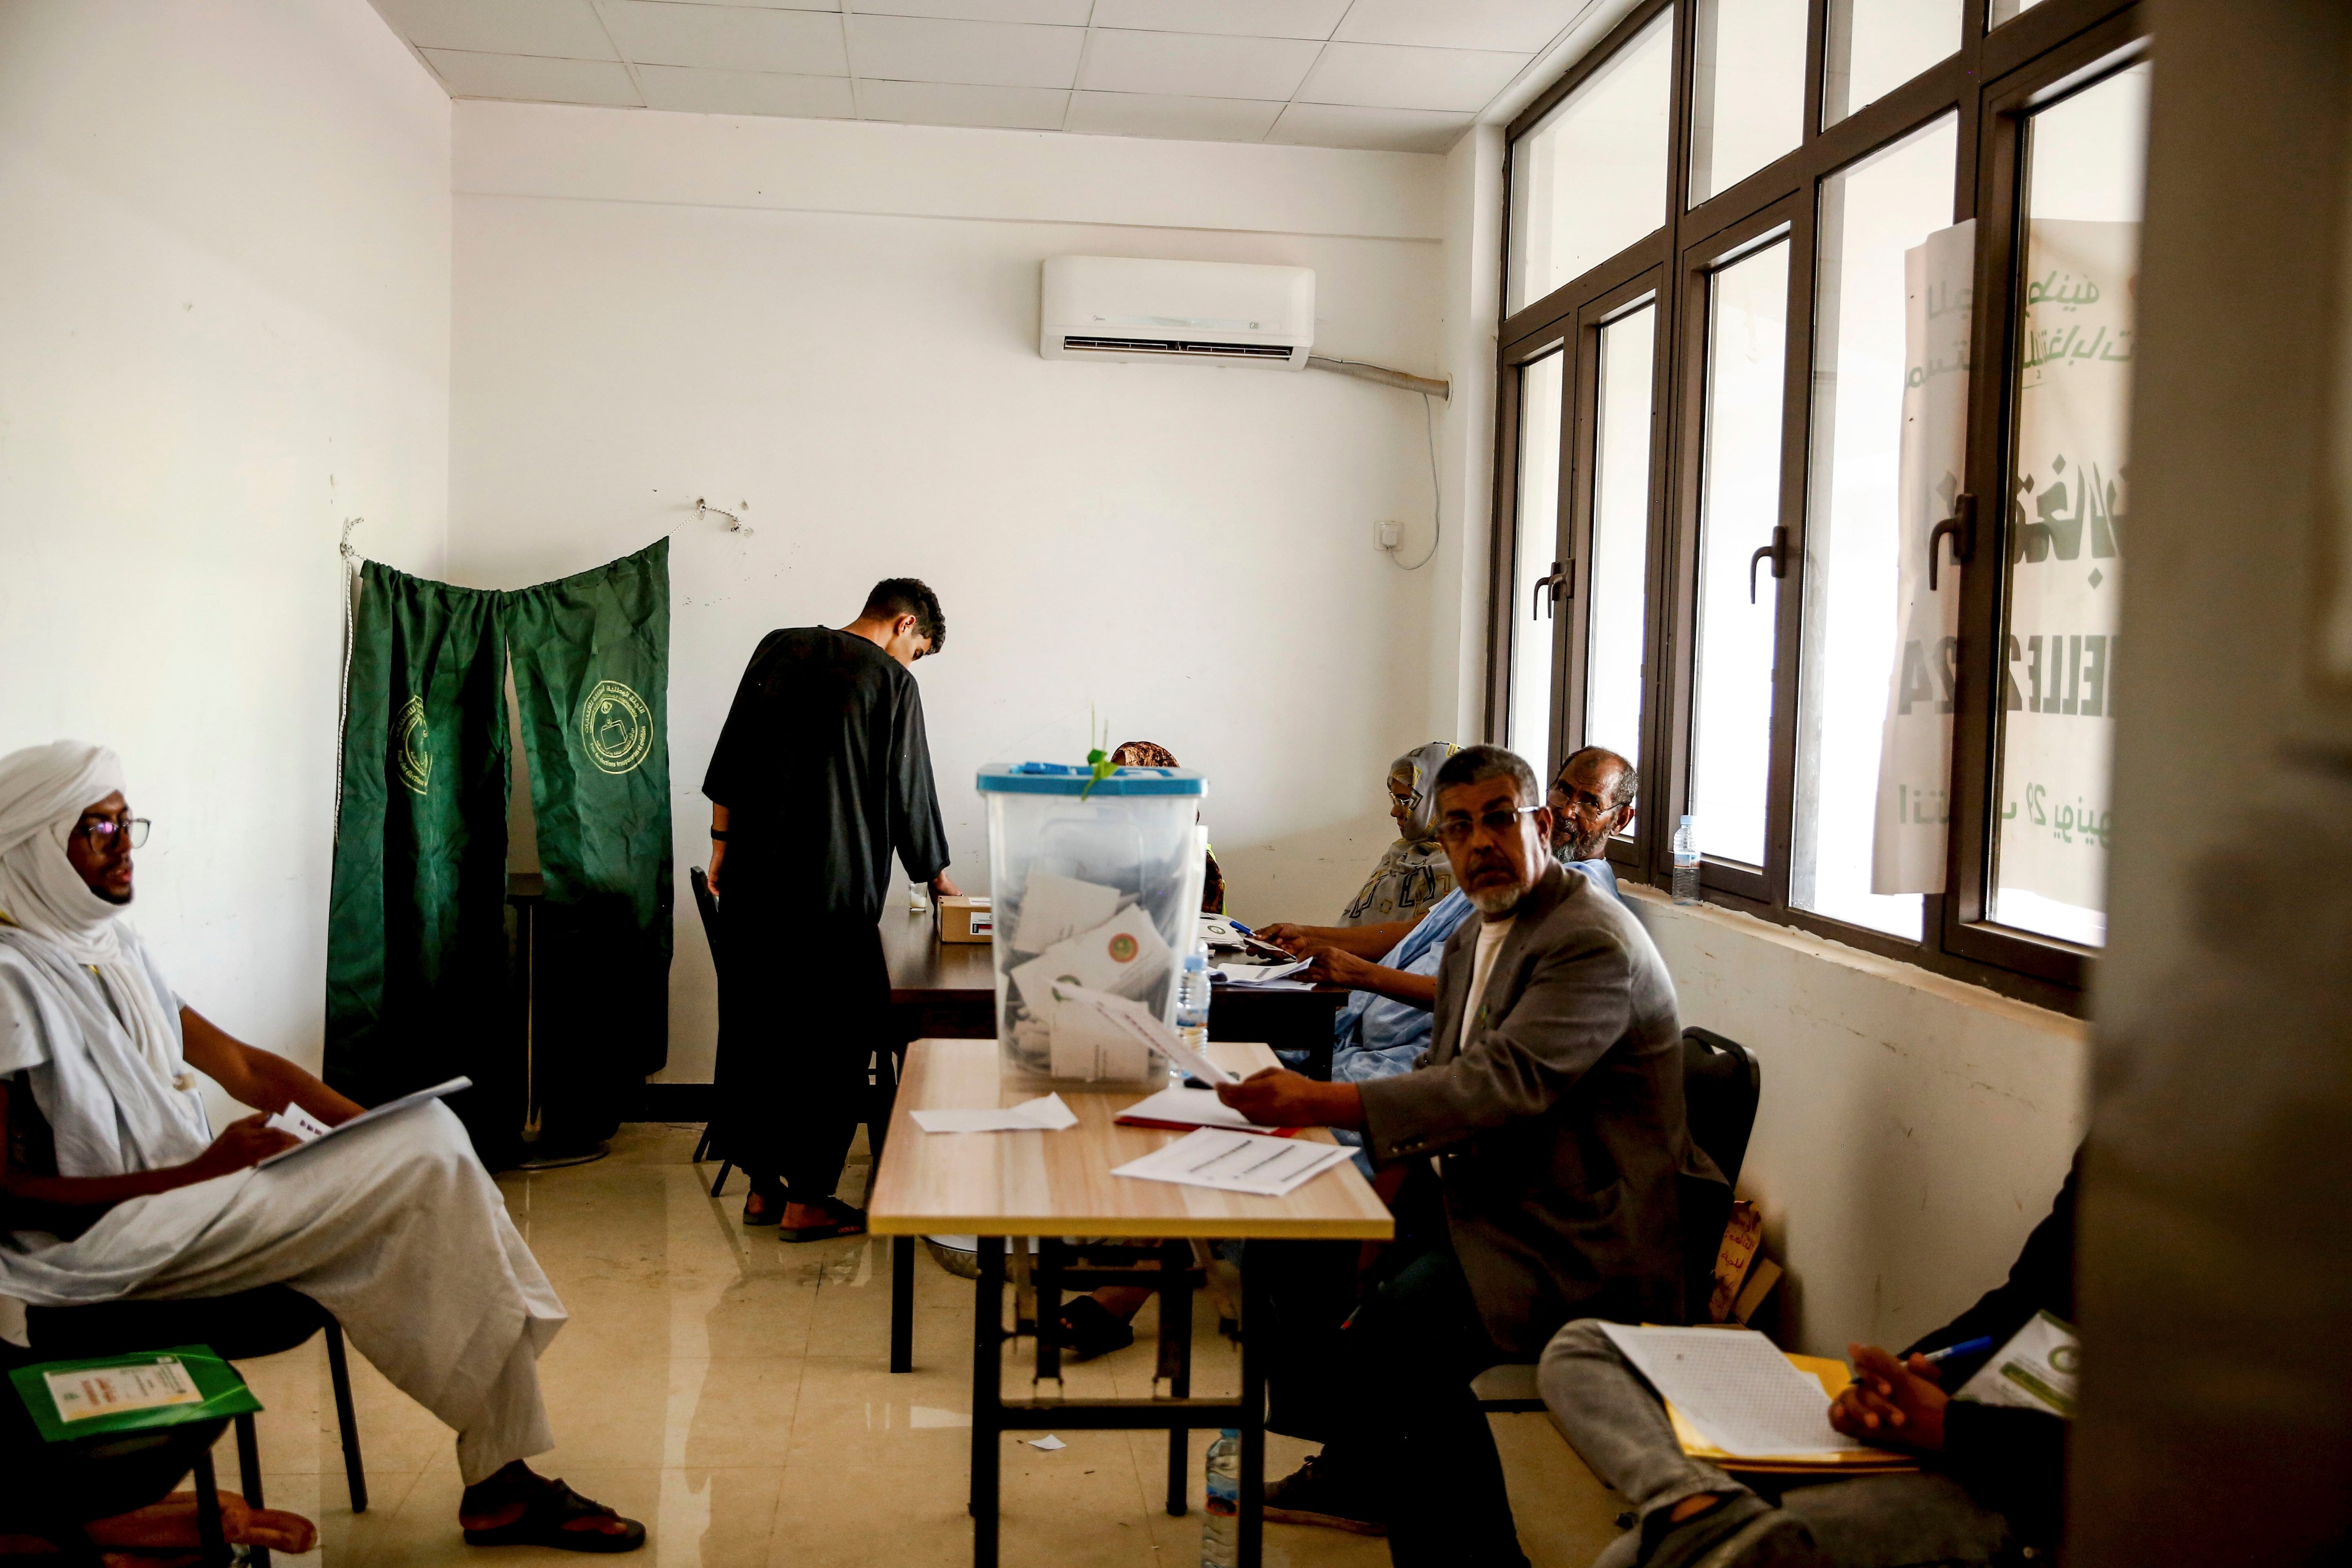 Mauritania's President Ghazouani wins reelection, provisional results show thumbnail